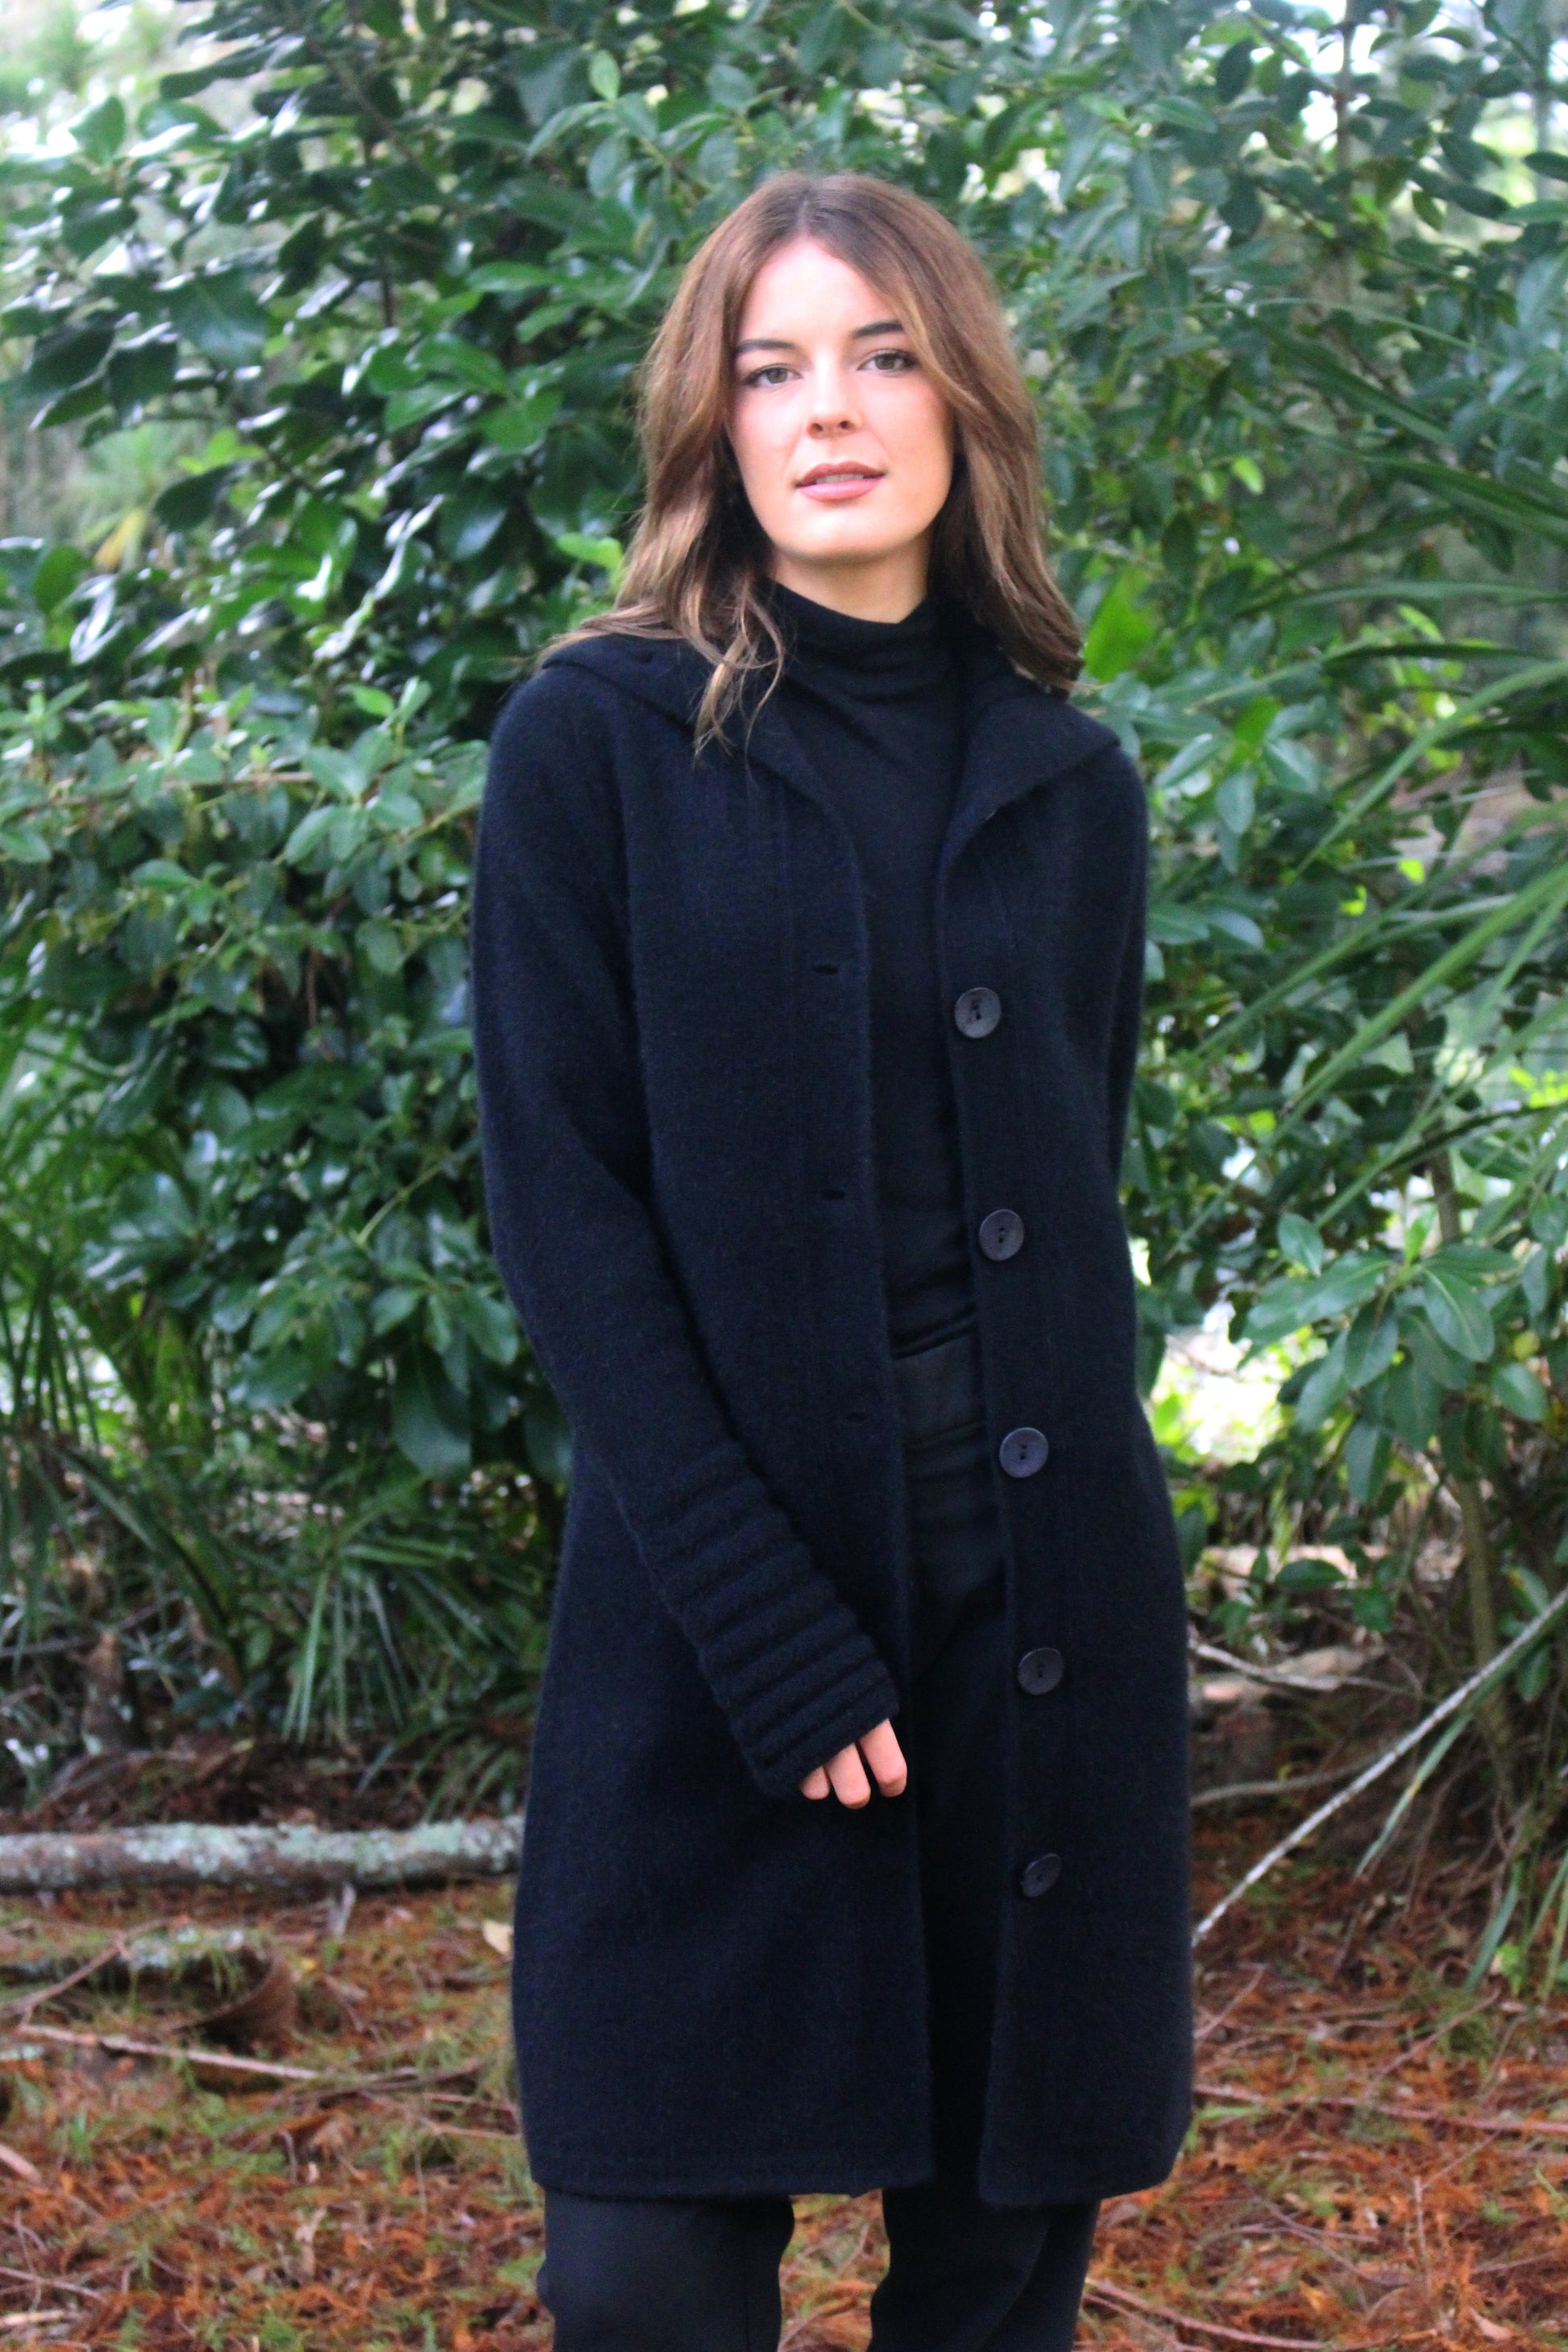 A heavier weight long coat in a possum merino blend. Has V-shaped rib detail at the collar and roll back cuffs with button through fastening. In black only and sizes S, M, L, XL, XXL. Made in NZ by Lothlorian for their Zinity Collection. 